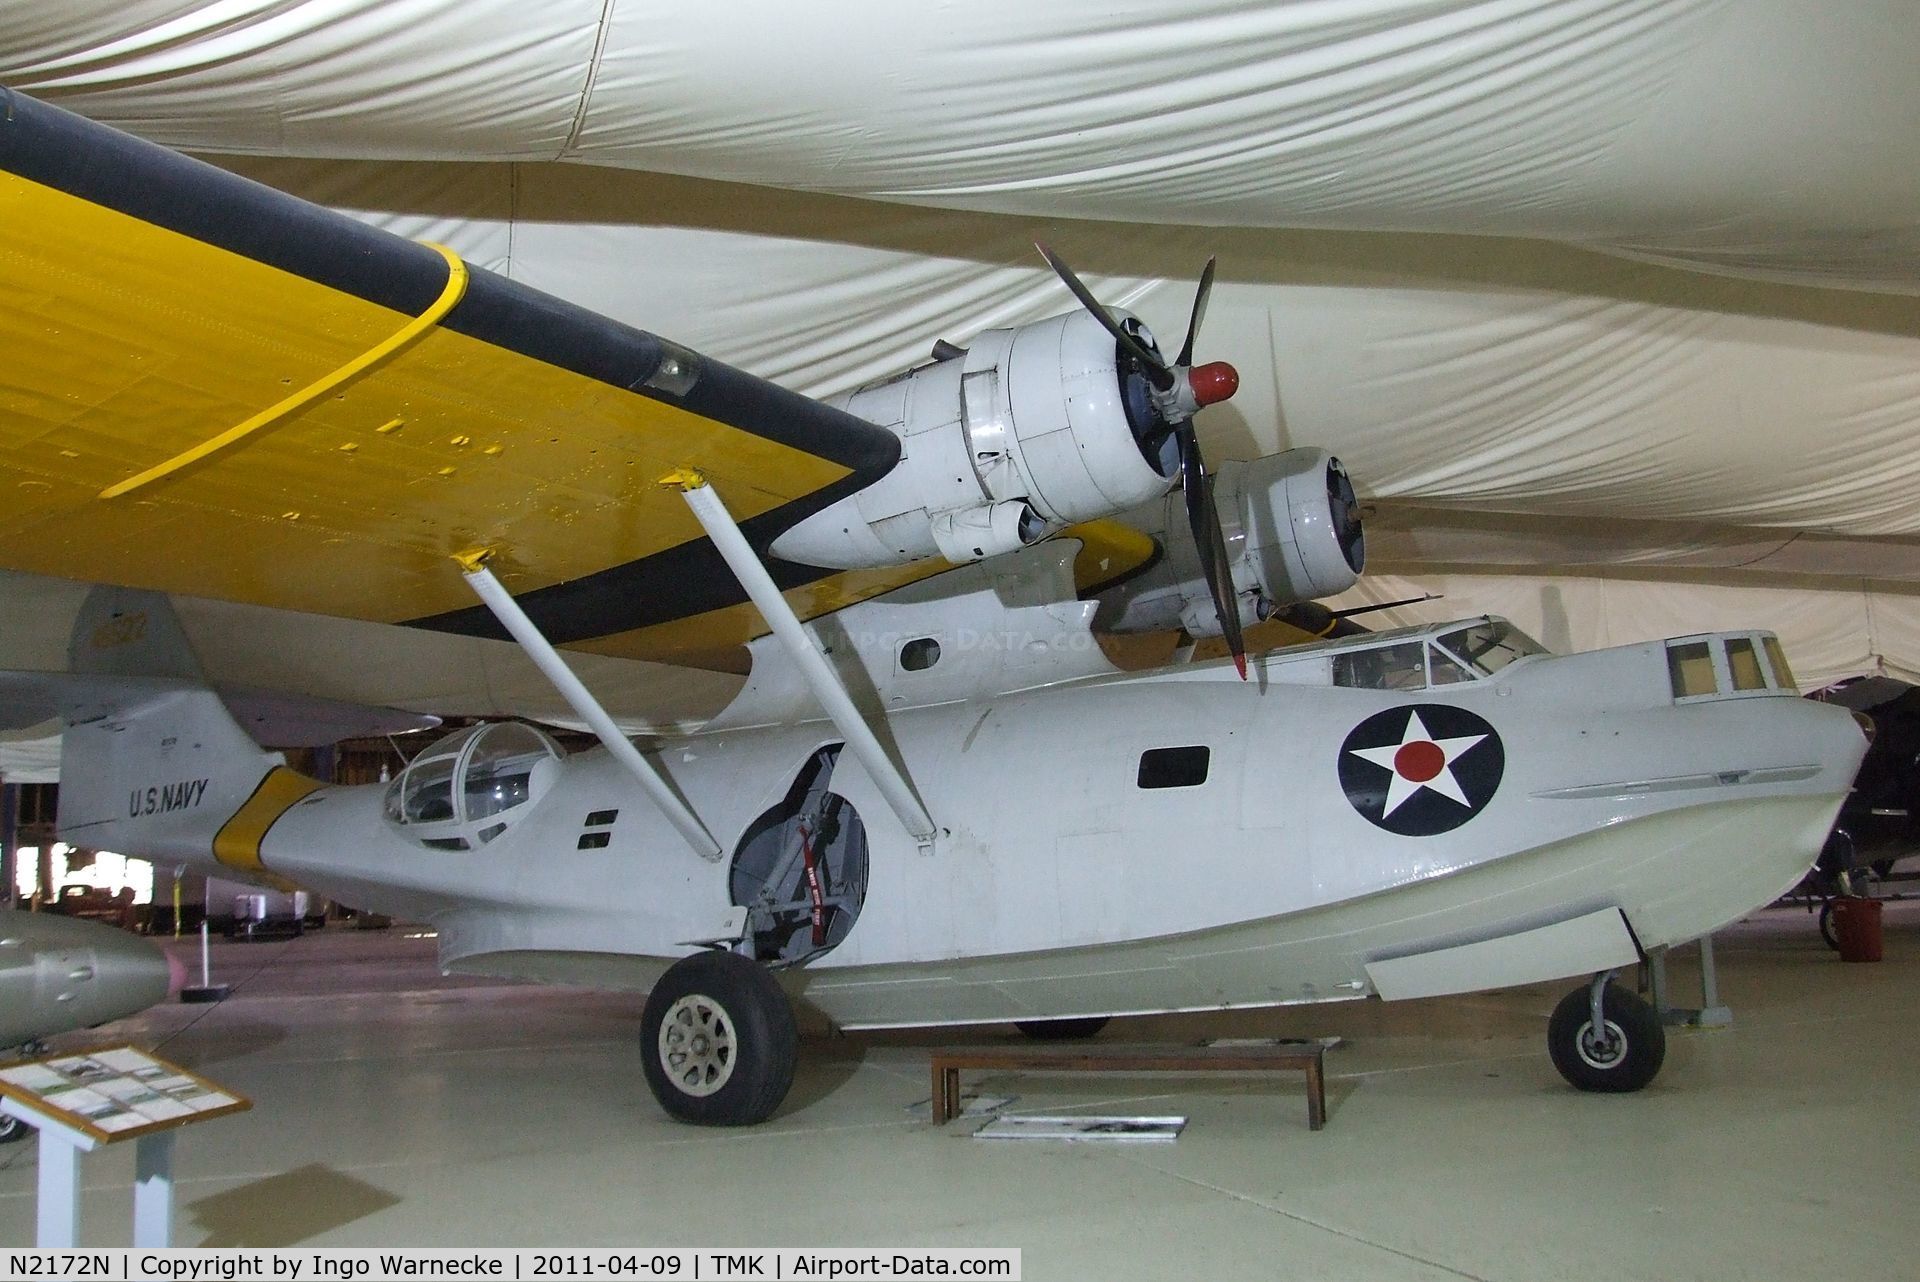 N2172N, 1944 Consolidated Vultee PBY-5A C/N 46522, Consolidated PBY-5A Catalina at the Tillamook Air Museum, Tillamook OR